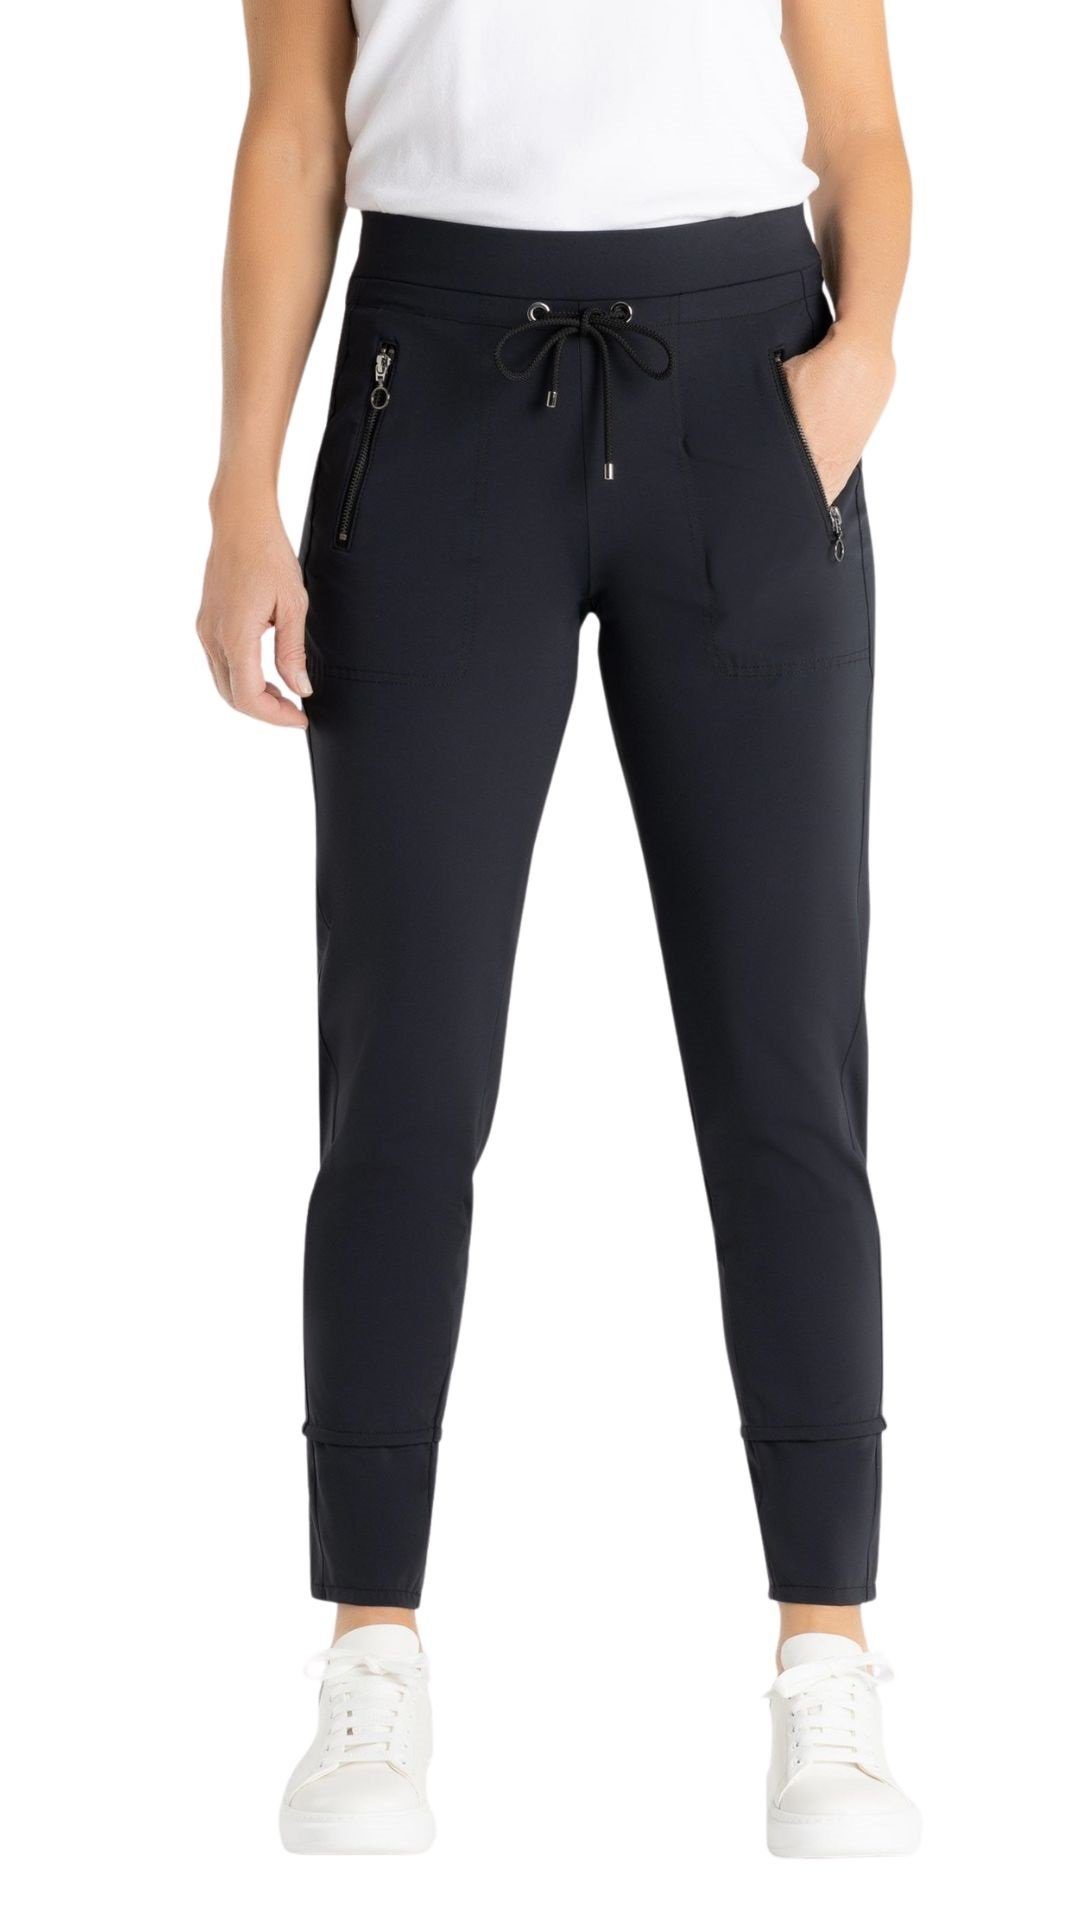 mit Tunnelzug Relaxed Active black Stretch leichtem aus Techno Pants Jogger Easy MAC Fit